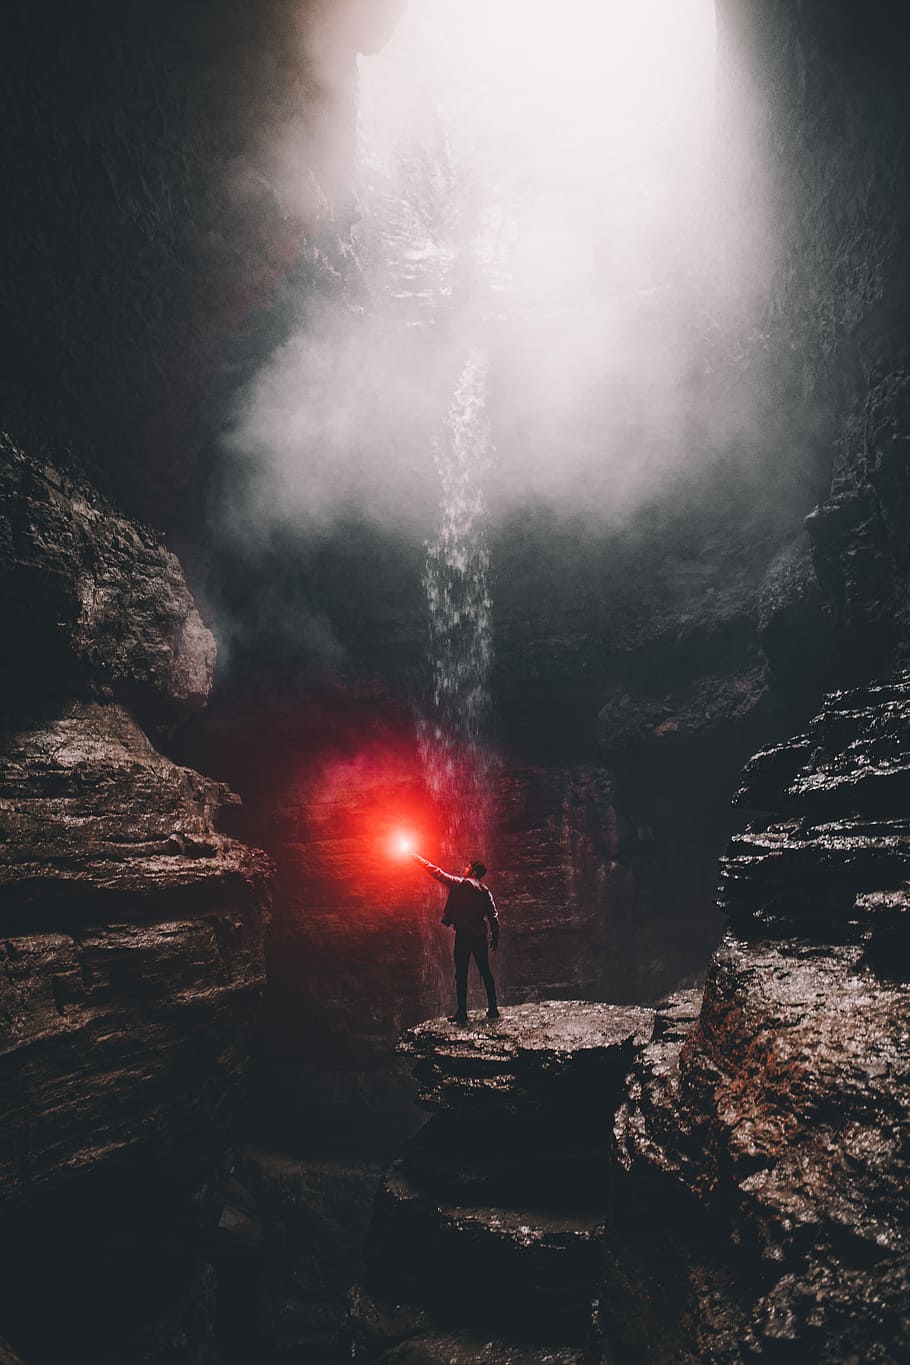 man standing on rock formation with water falls, person holding red light inside cave with waterfall